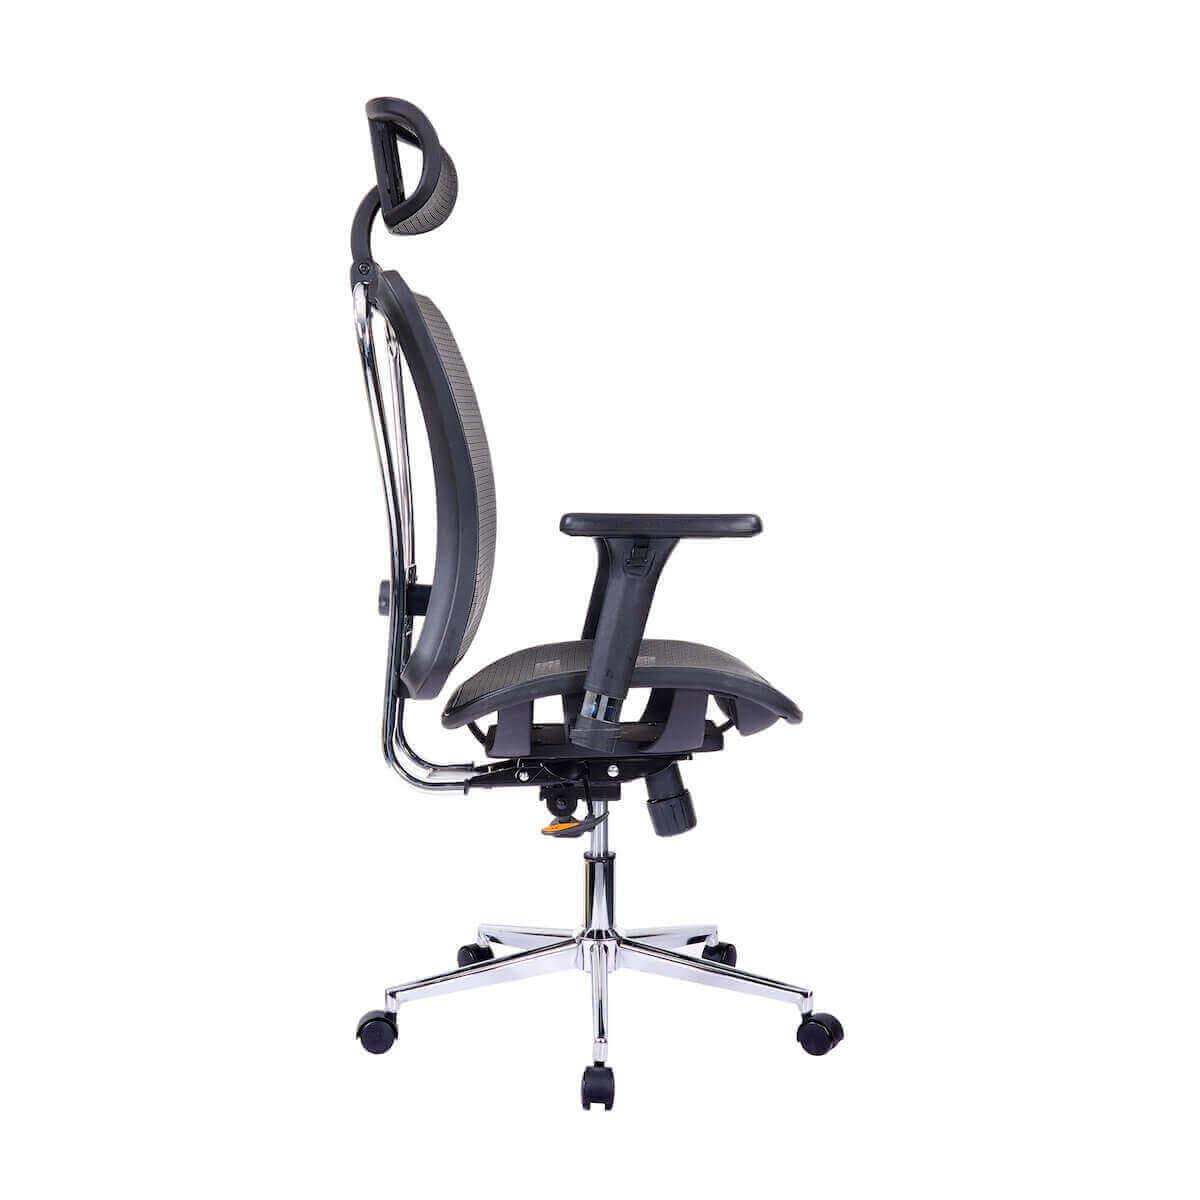 Techni Mobili Black High Back Executive Mesh Office Chair with Arms, Headrest, and Lumbar Support RTA-1009-BK Side